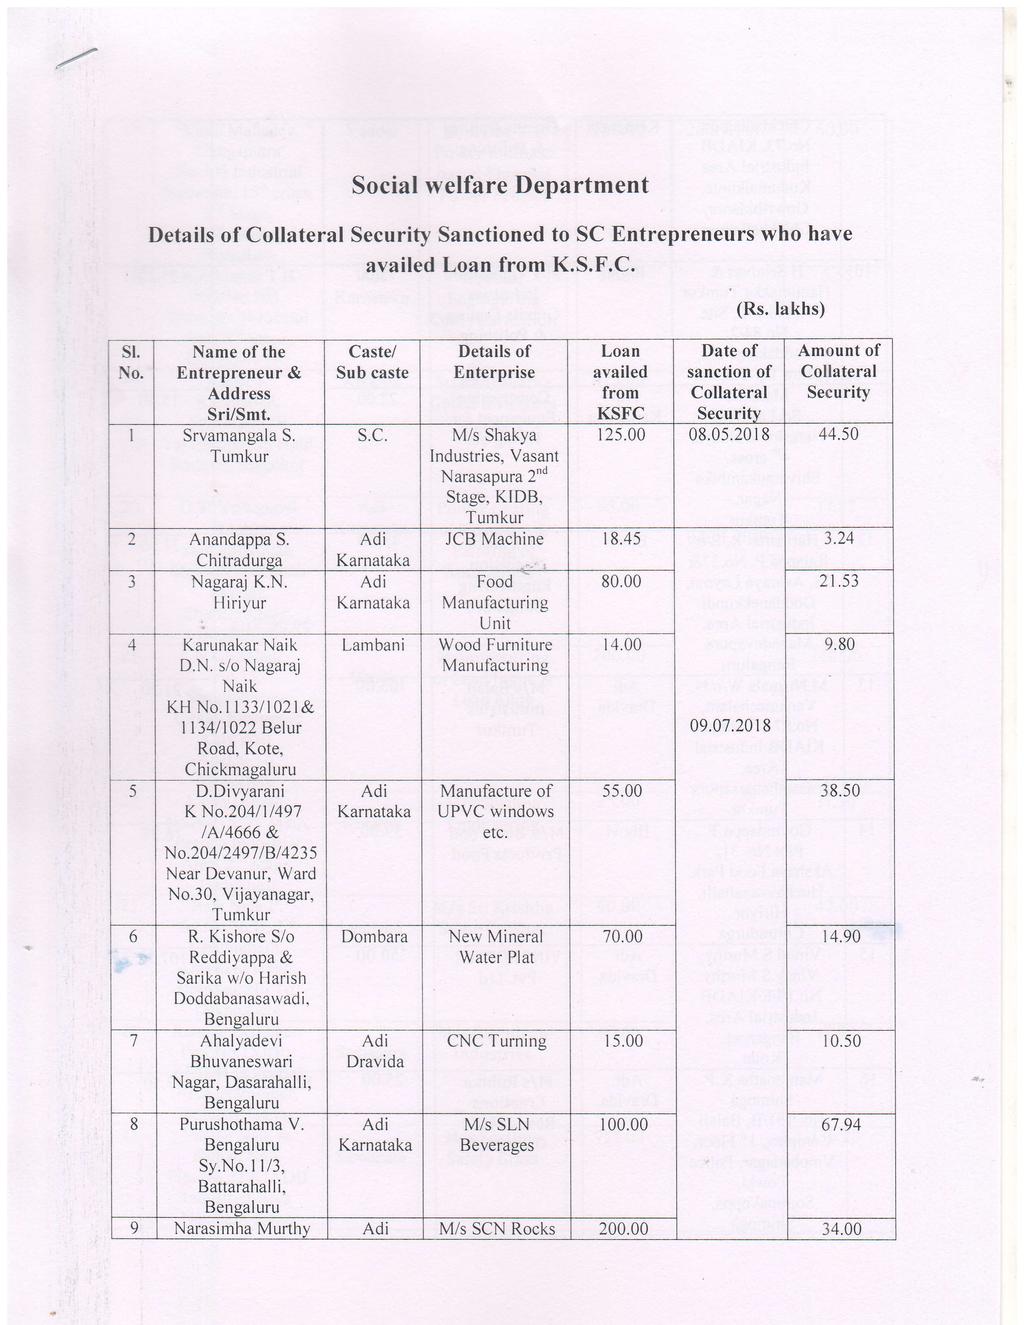 st. No. Social welfare Department Details of Collateral Security Sanctioned to SC Entrepreneurs who have availed Loan from K.S.F.C. Name of the Entrepreneur & Address Sri/Smt. l Srvamangala S.